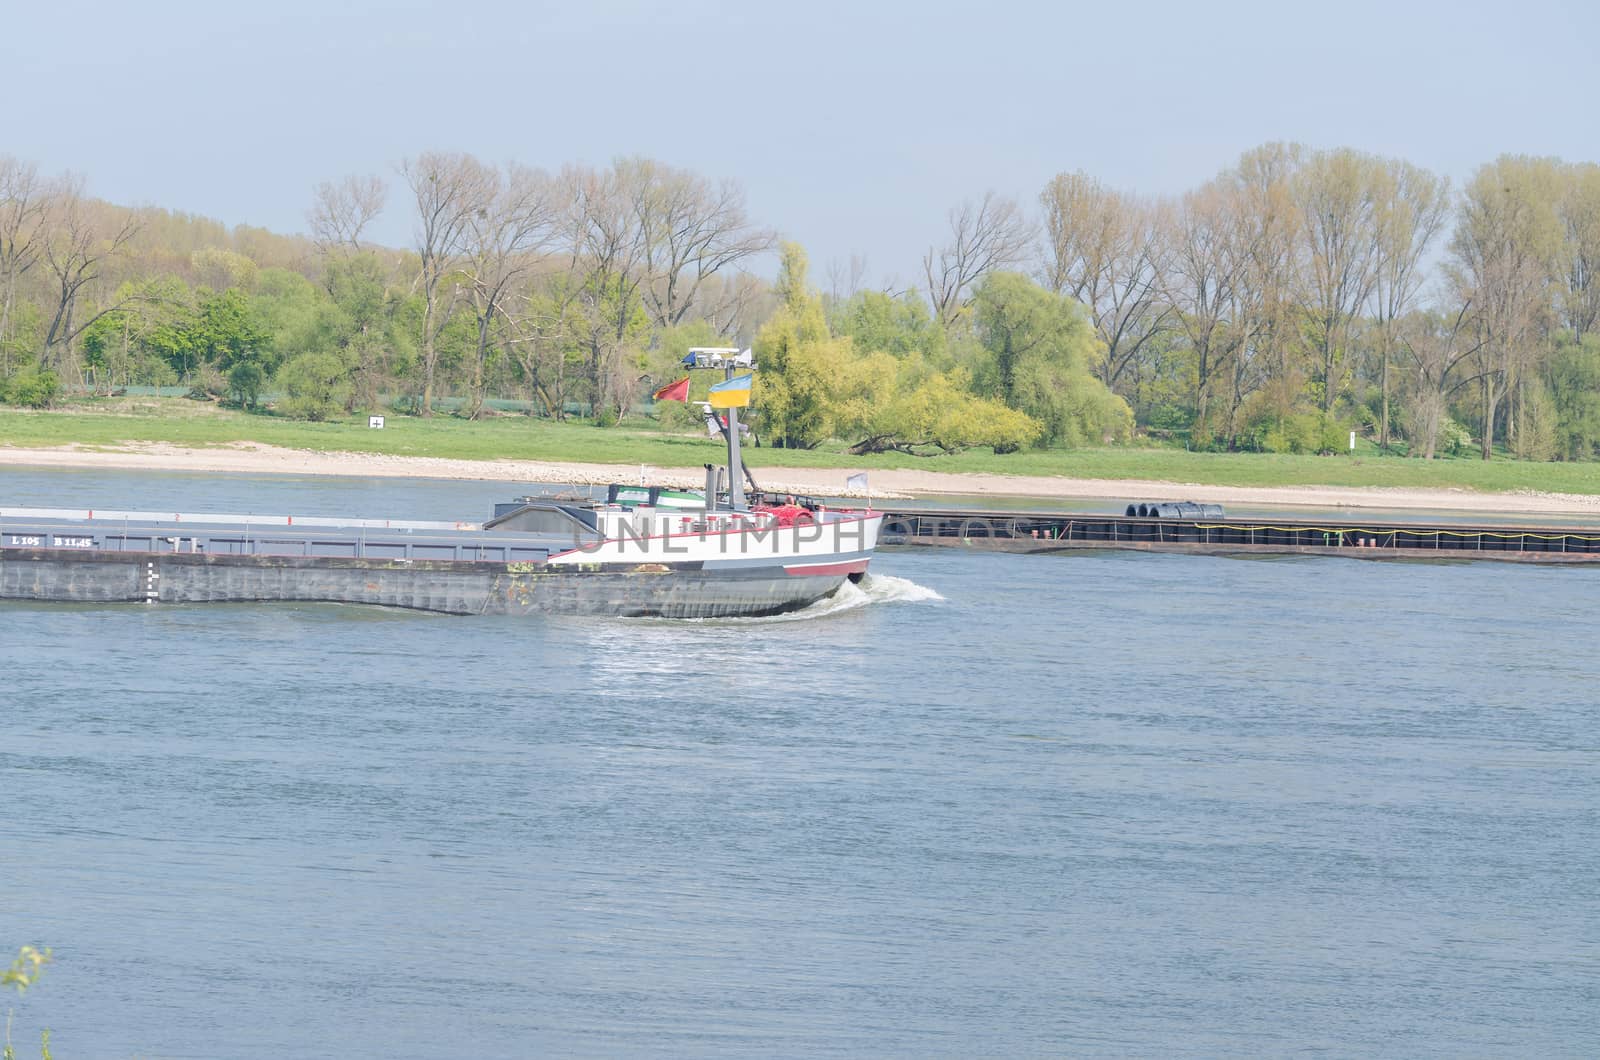 Two inland waterway on the Rhine meet.
A ship on uphill drive and the other on plummeting.